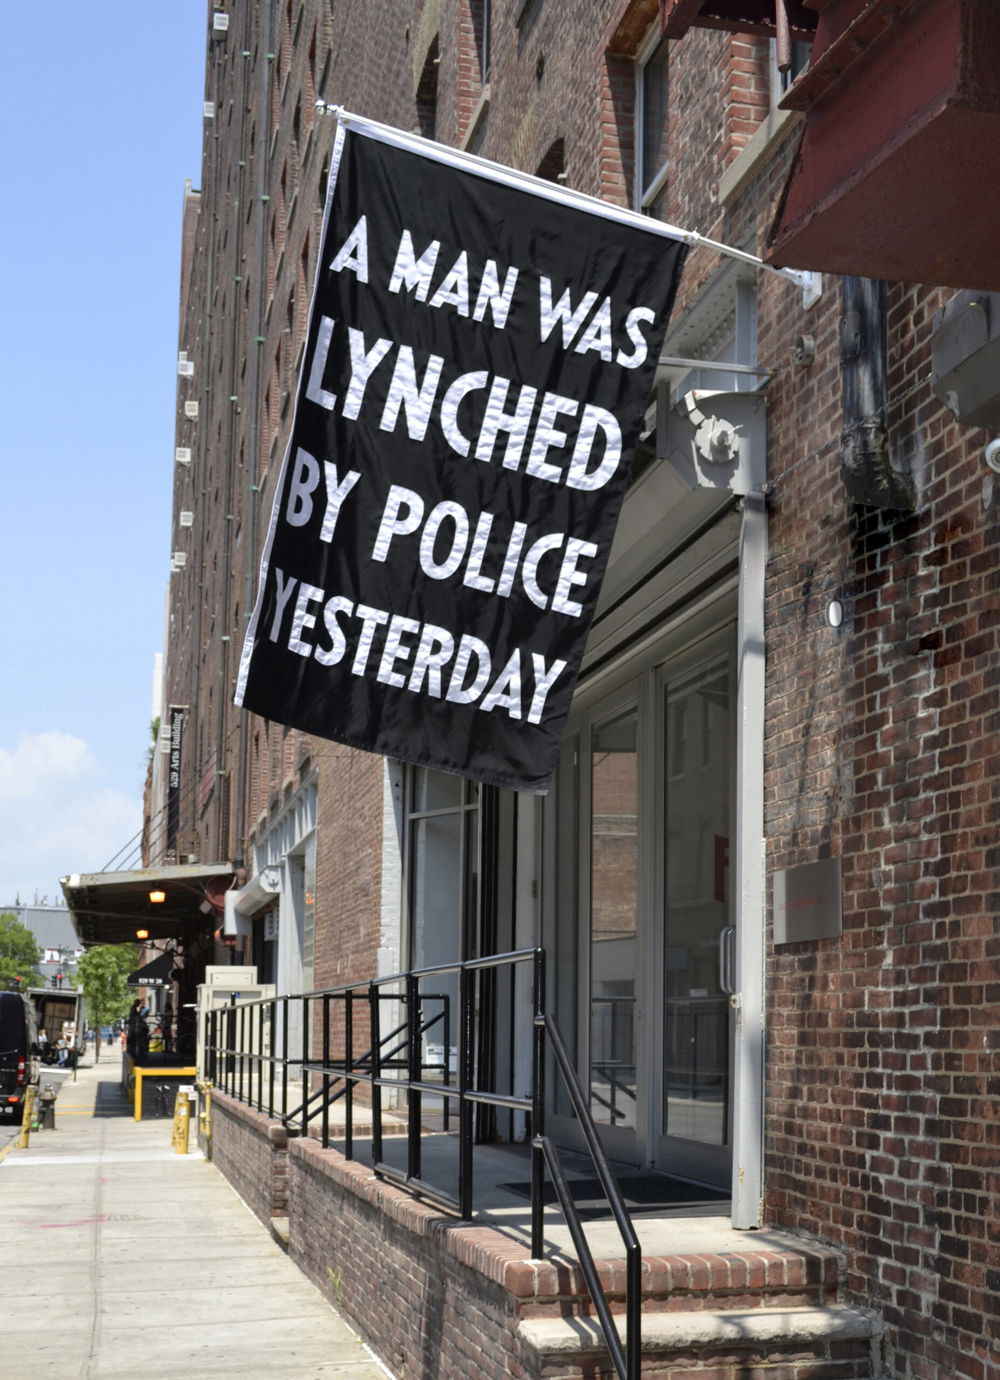 A Man Was Lynched By Police Yesterday, nylon, 84 x 52-1/2 inches, 2015. Based on NAACP banner; installed at Jack Shainman gallery in July 2016. Photo courtesy of the artist and Jack Shainman Gallery, New York.